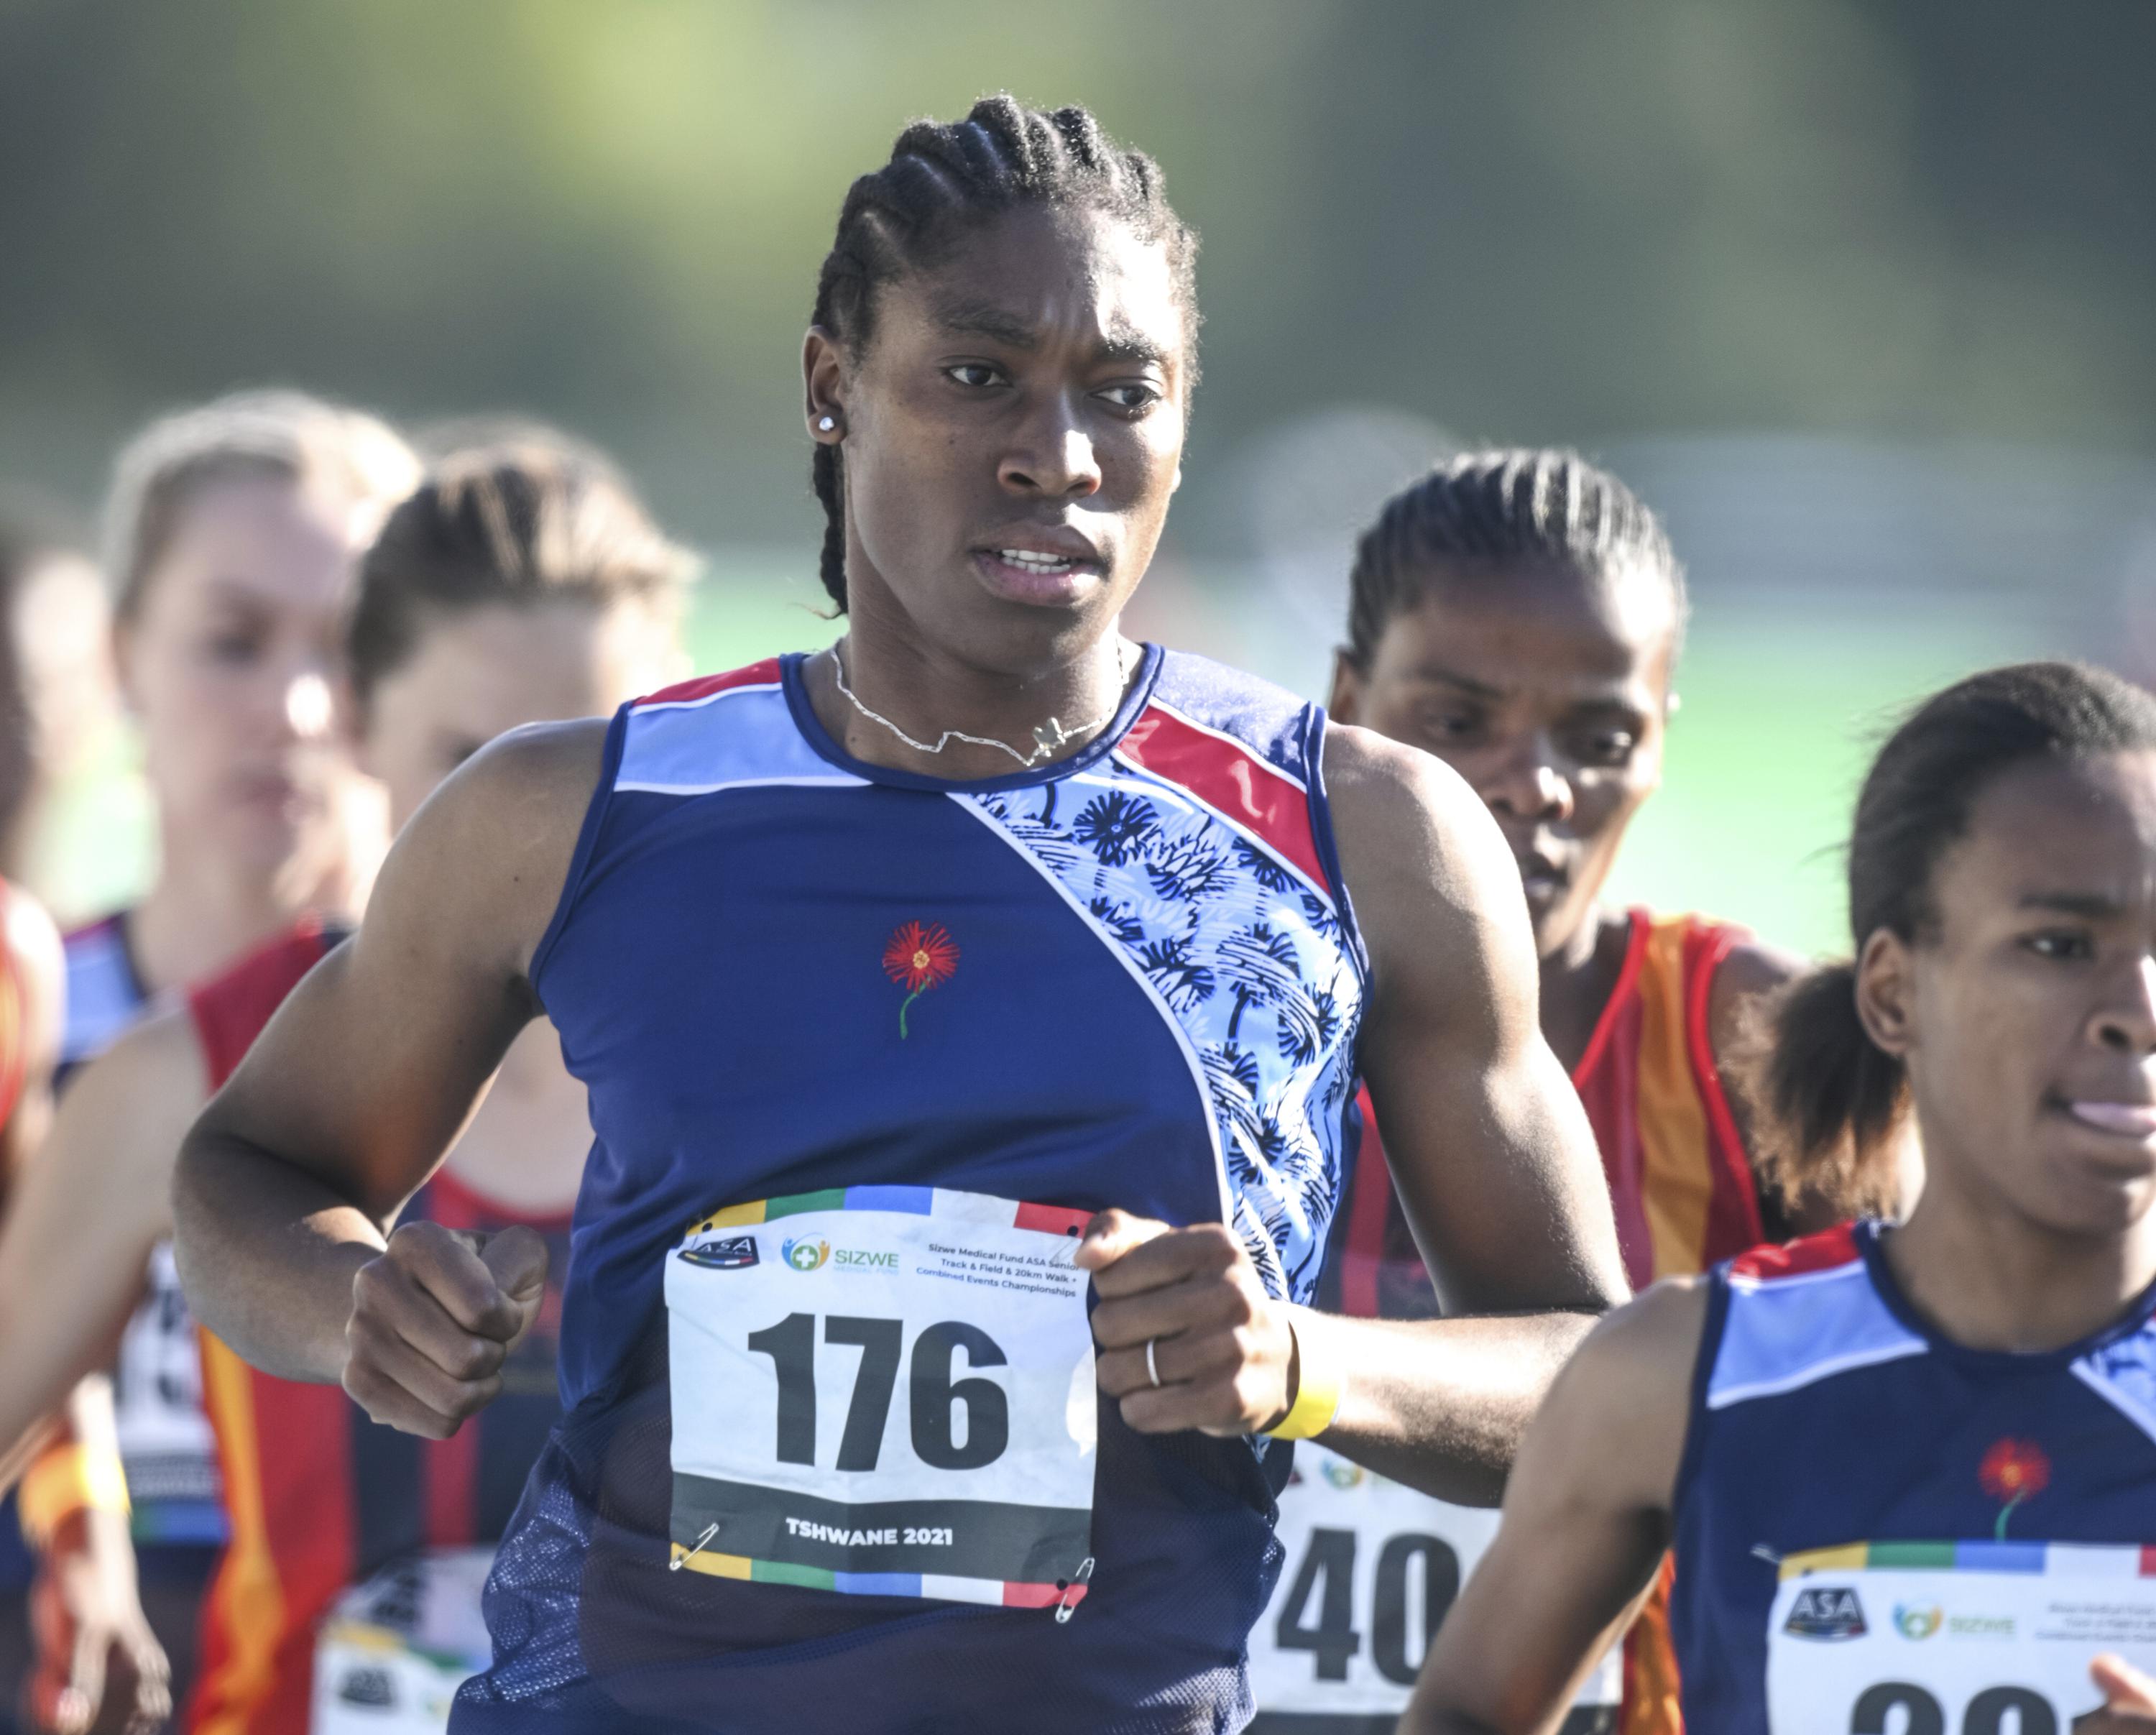 Should Caster Semenya be allowed to compete against women?